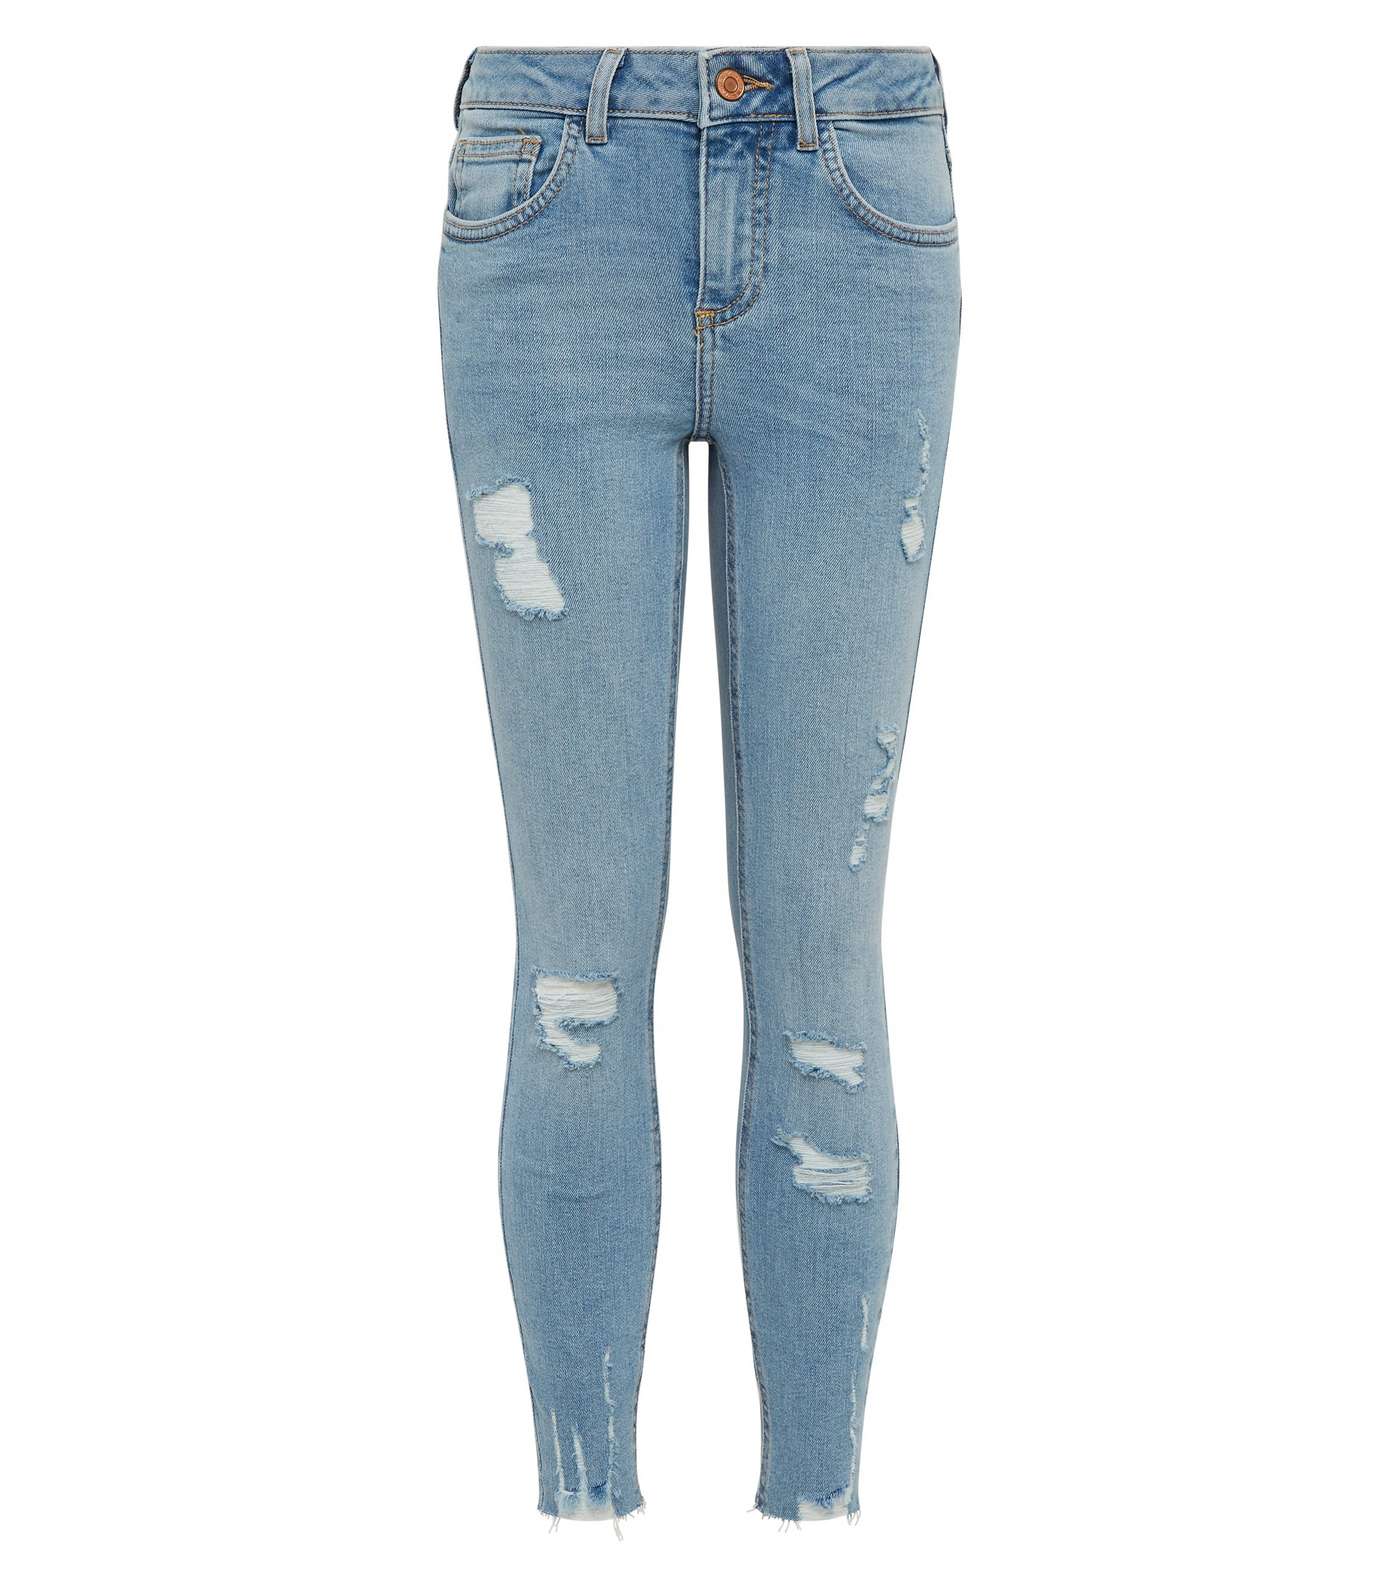 Girls Pale Blue Ripped High Waist Skinny Jeans  Image 4